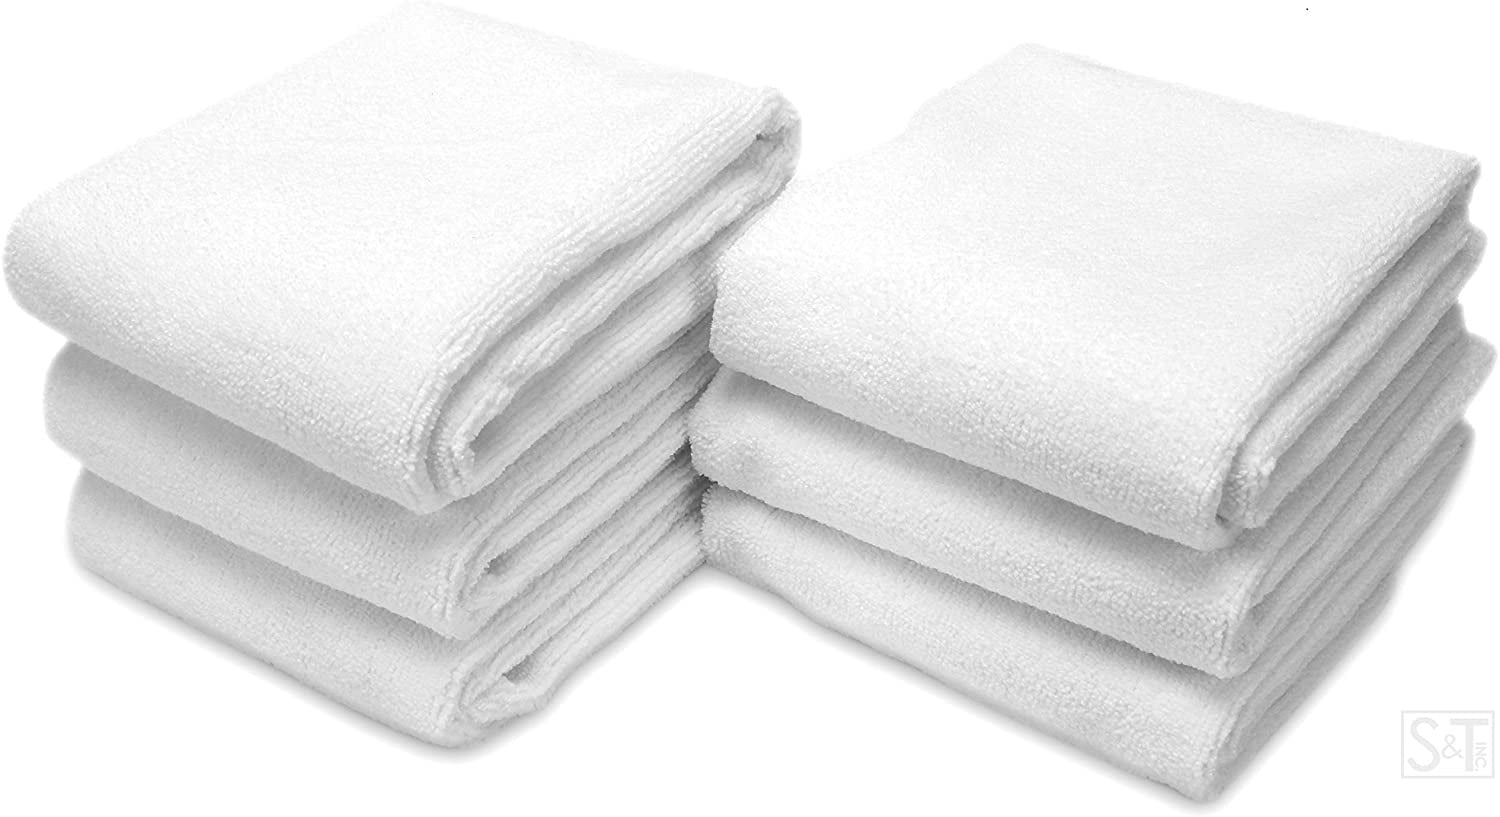 Microfiber Fitness Exercise Gym Towels 16-Inch x 27-Inch 6 Pack S&T INC 360 GSM